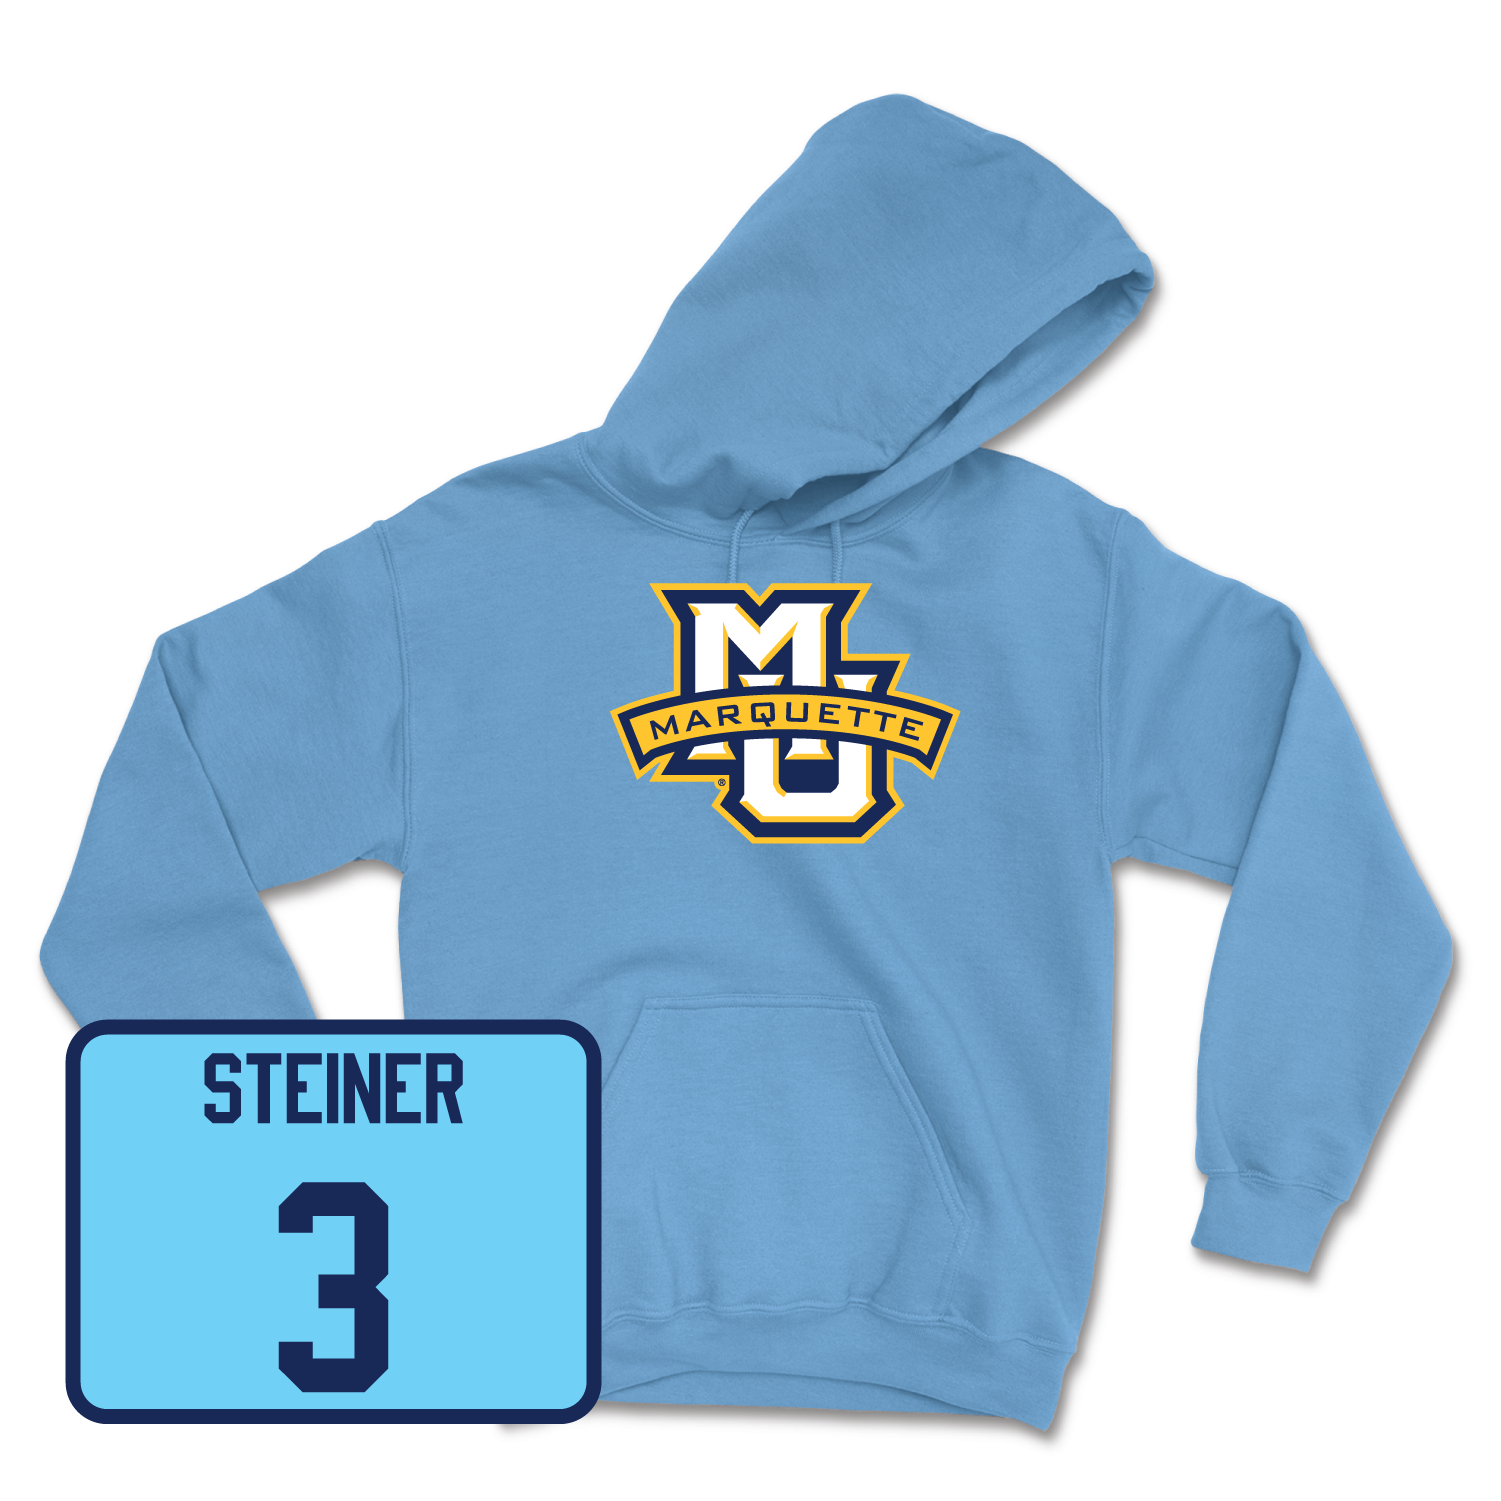 Championship Blue Women's Lacrosse Marquette Hoodie 2 4X-Large / Leigh Steiner | #3